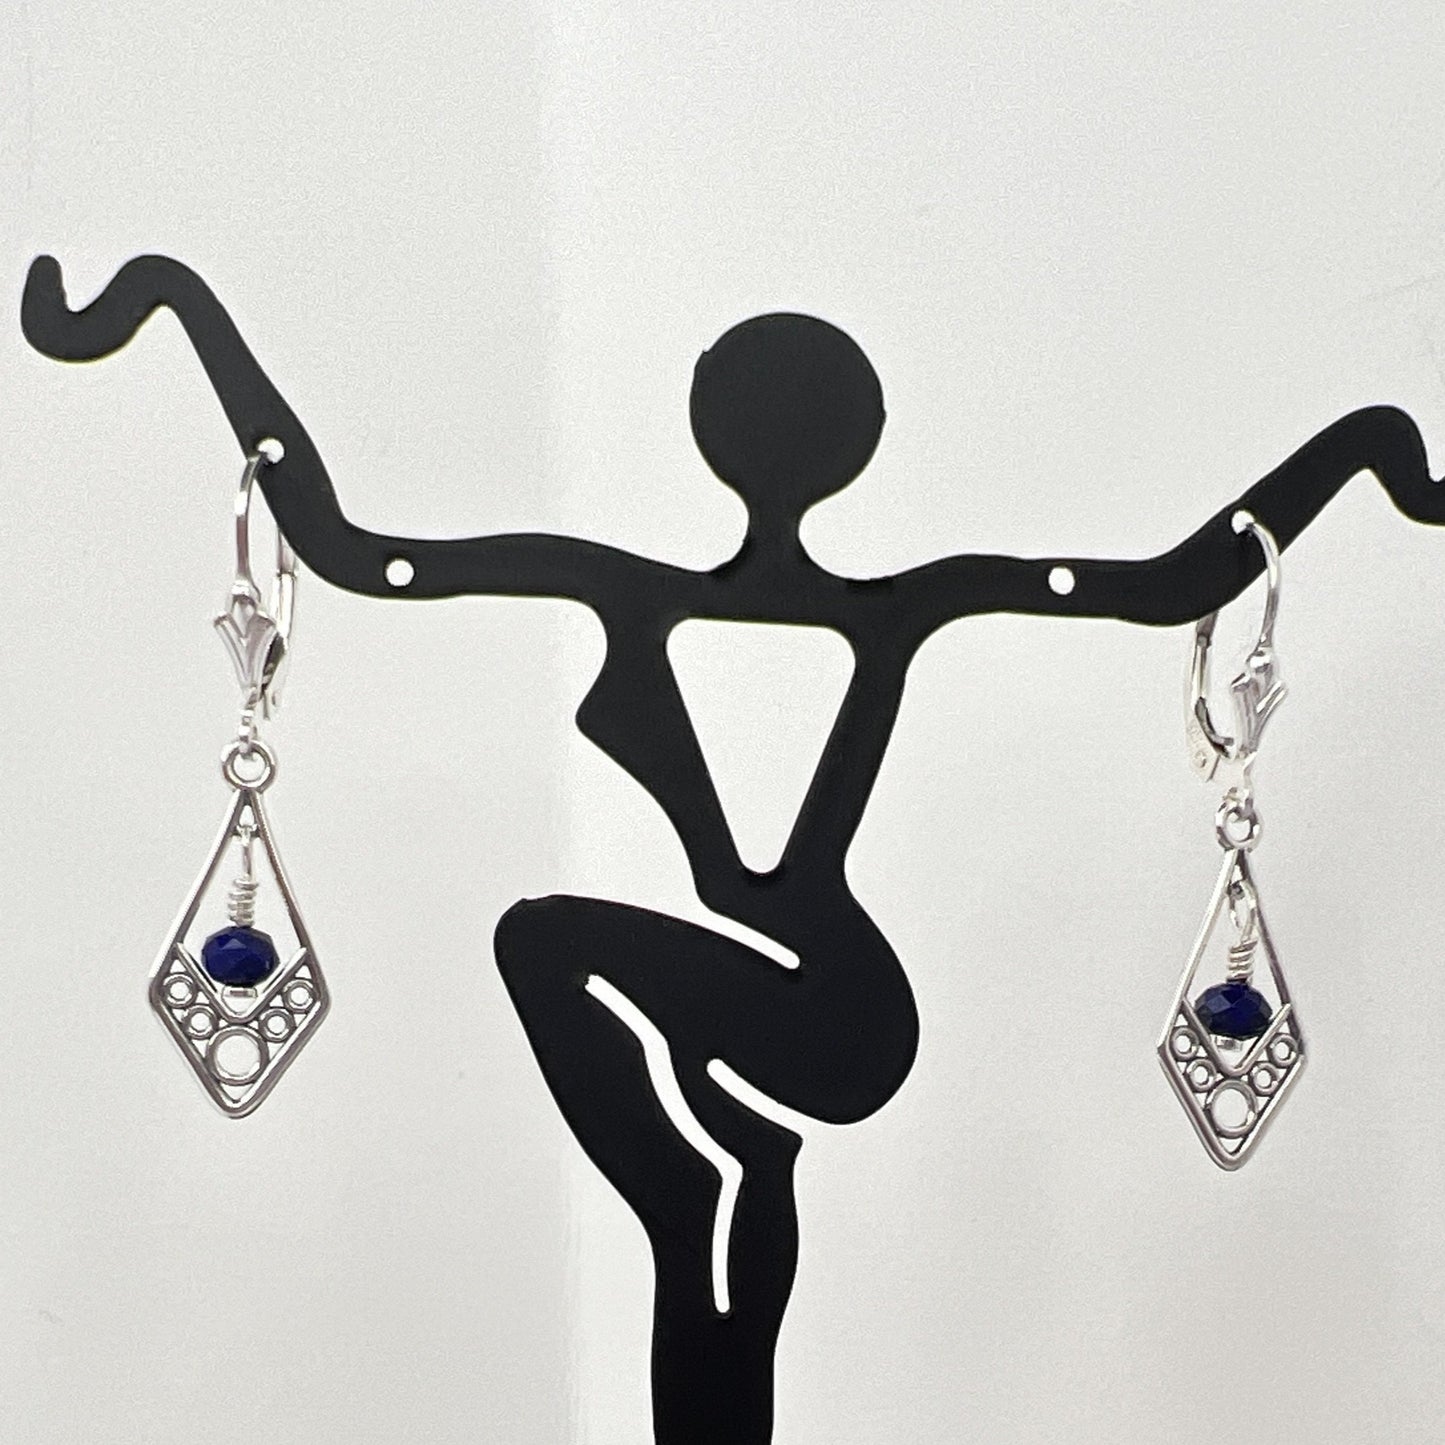 Natural rondelle Lapis hand wrapped inside sterling silver filigree sterling silver with sterling silver lever back earrings